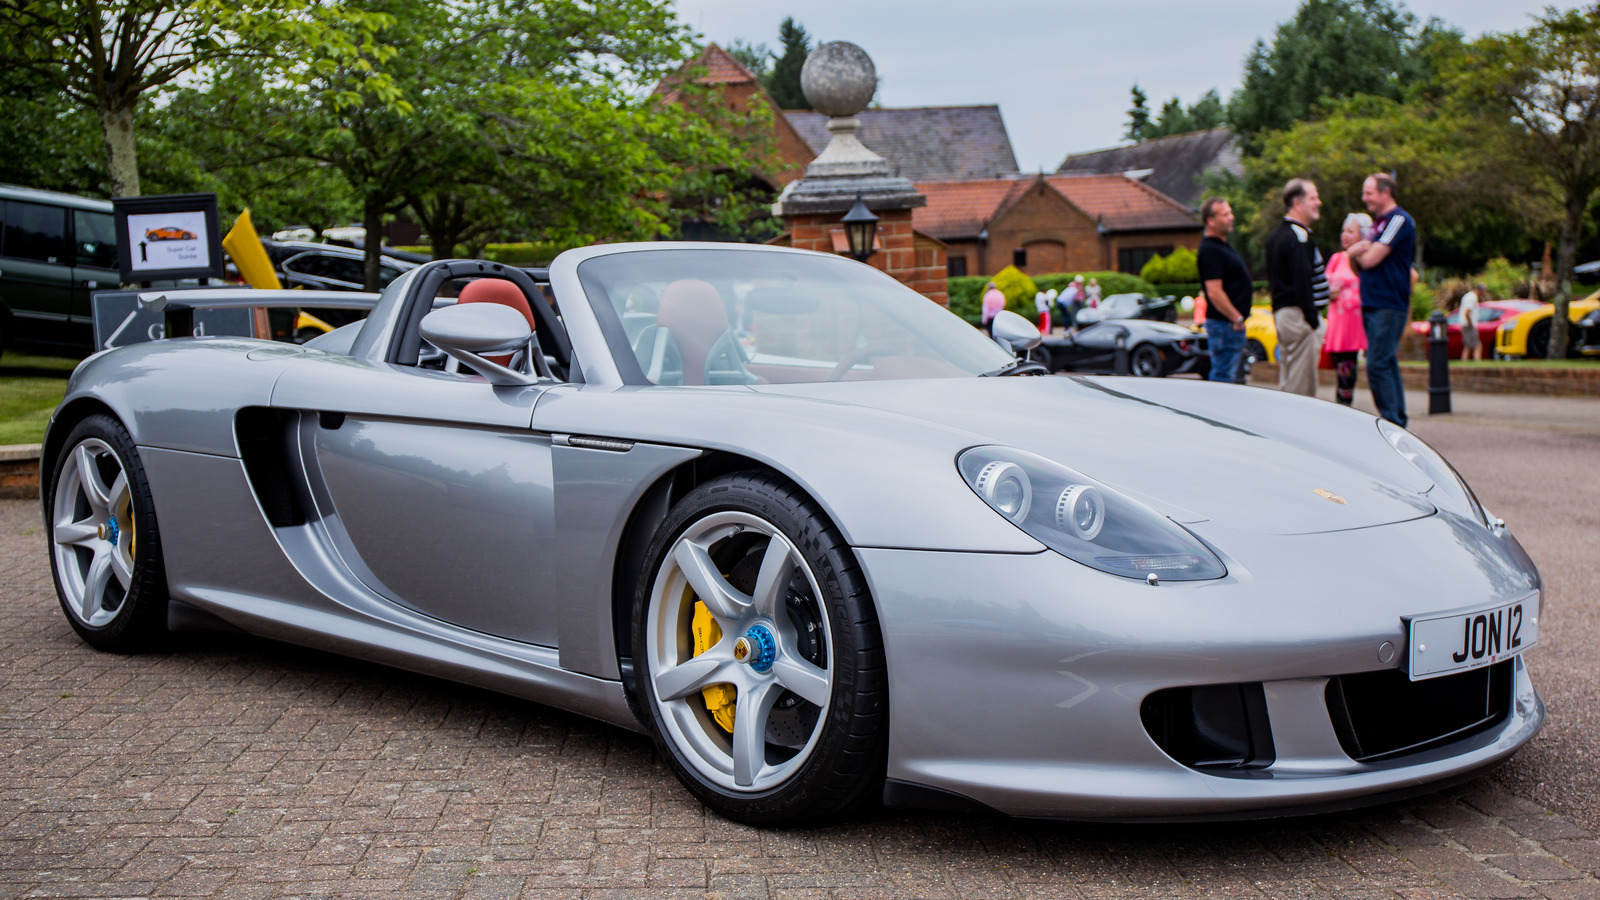 Why Porsche Discontinued The Legendary Carrera GT